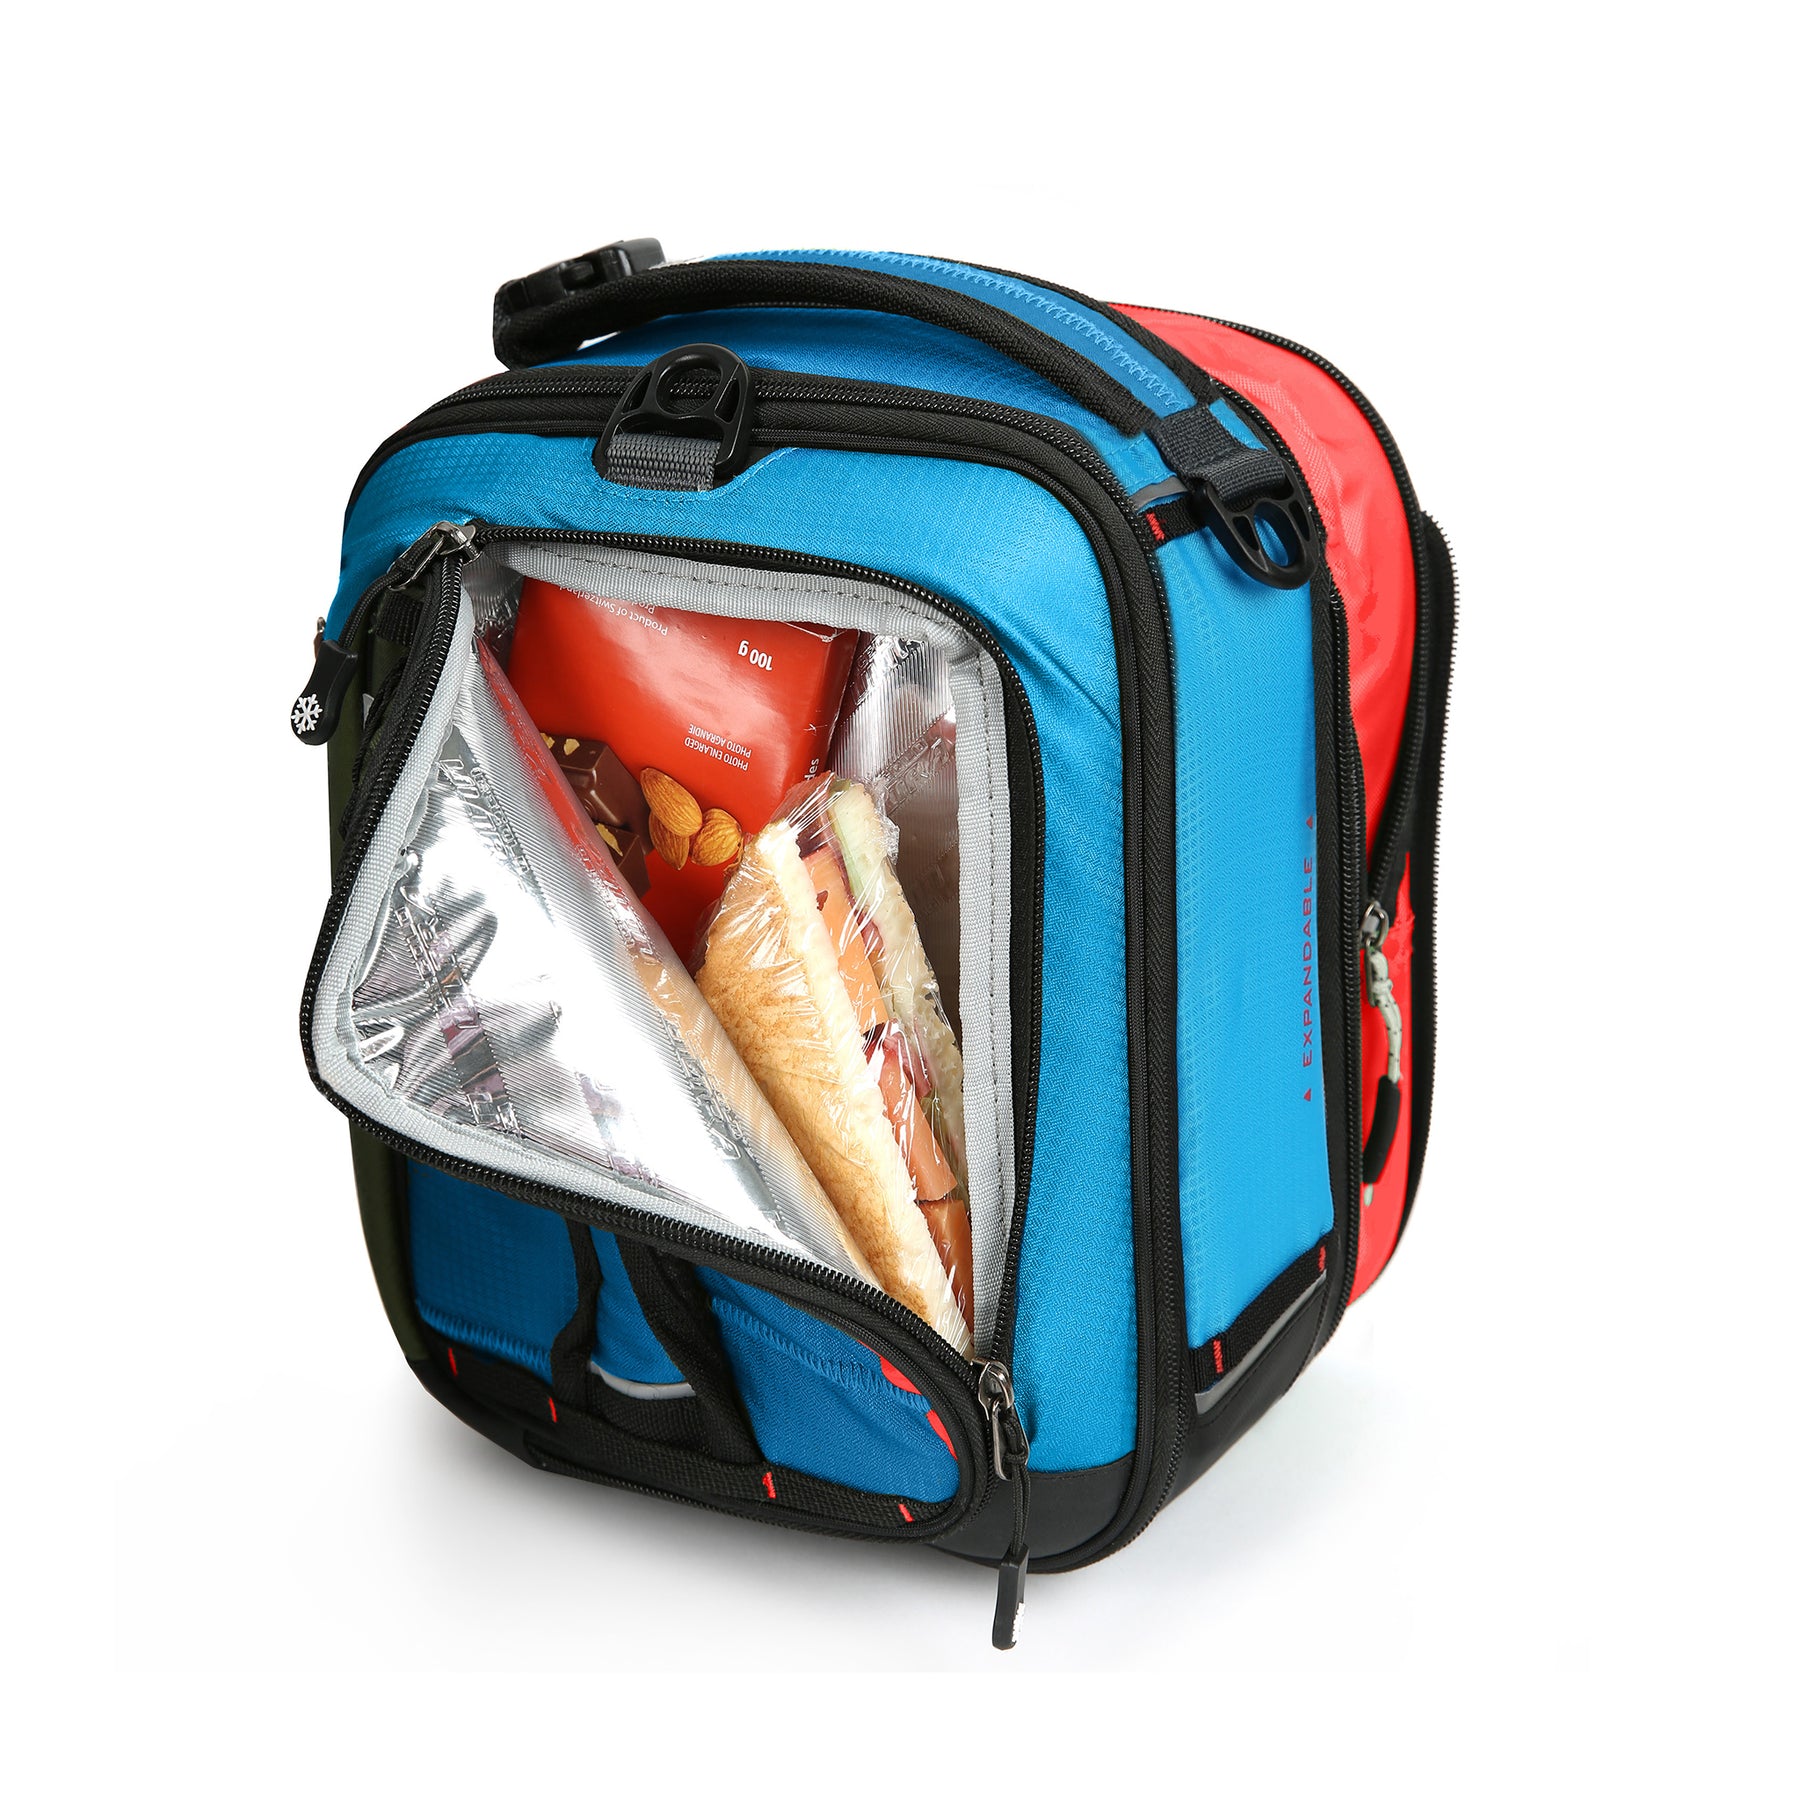 Titan by Arctic Zone™ Fridge Cold Expandable Lunch Bag with 2 Ice Walls